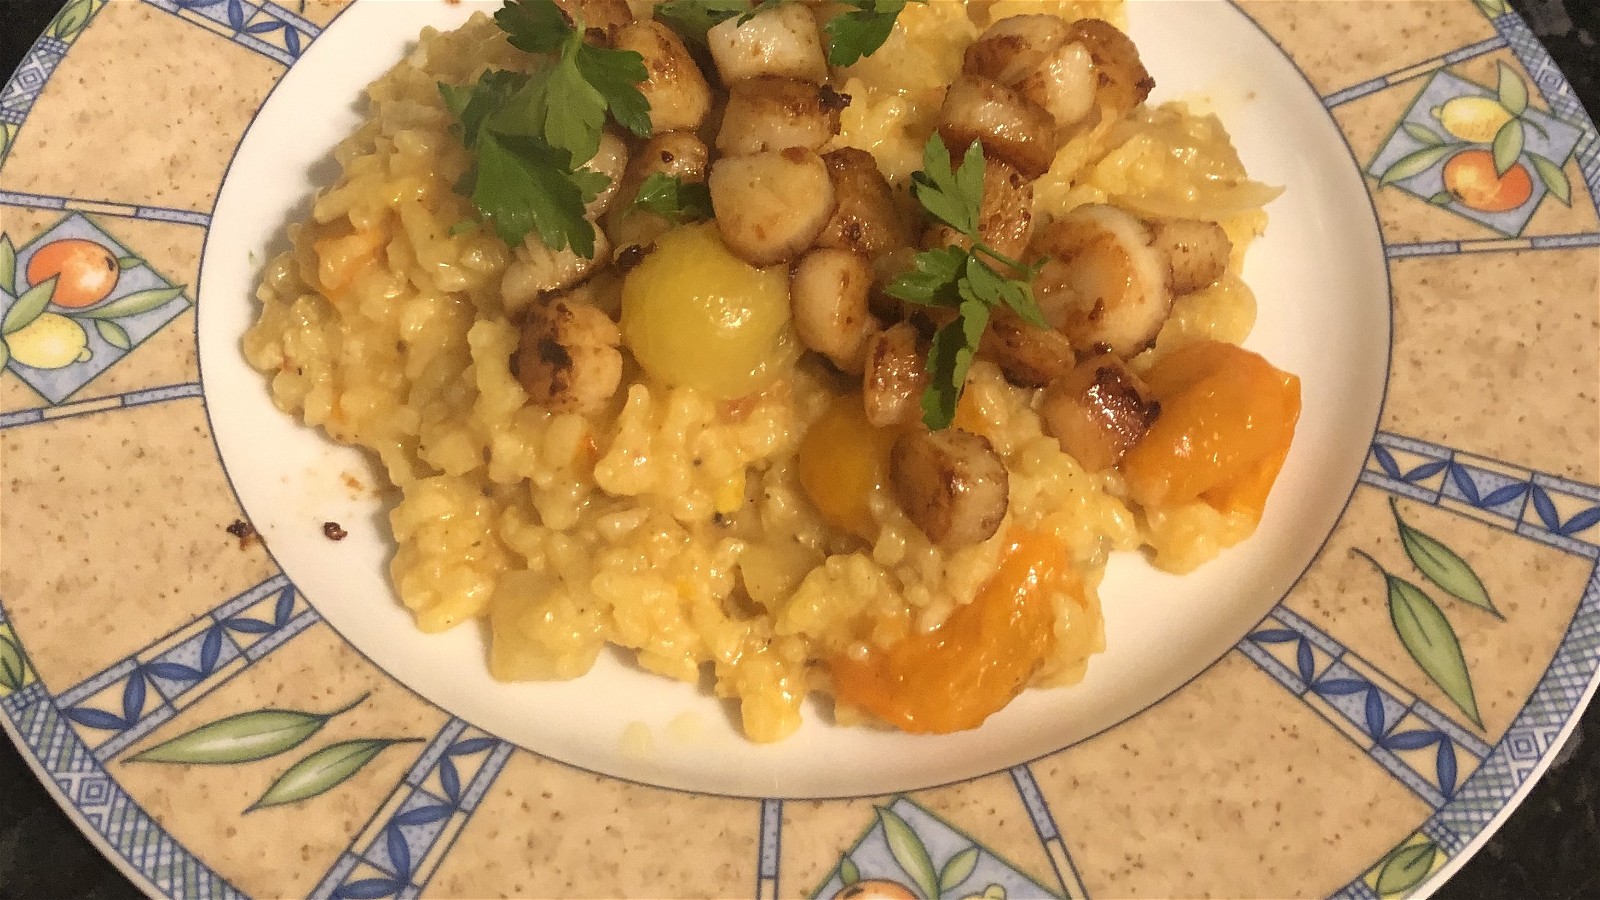 Image of Scallops & Saffron Risotto with Blistered Tomatoes